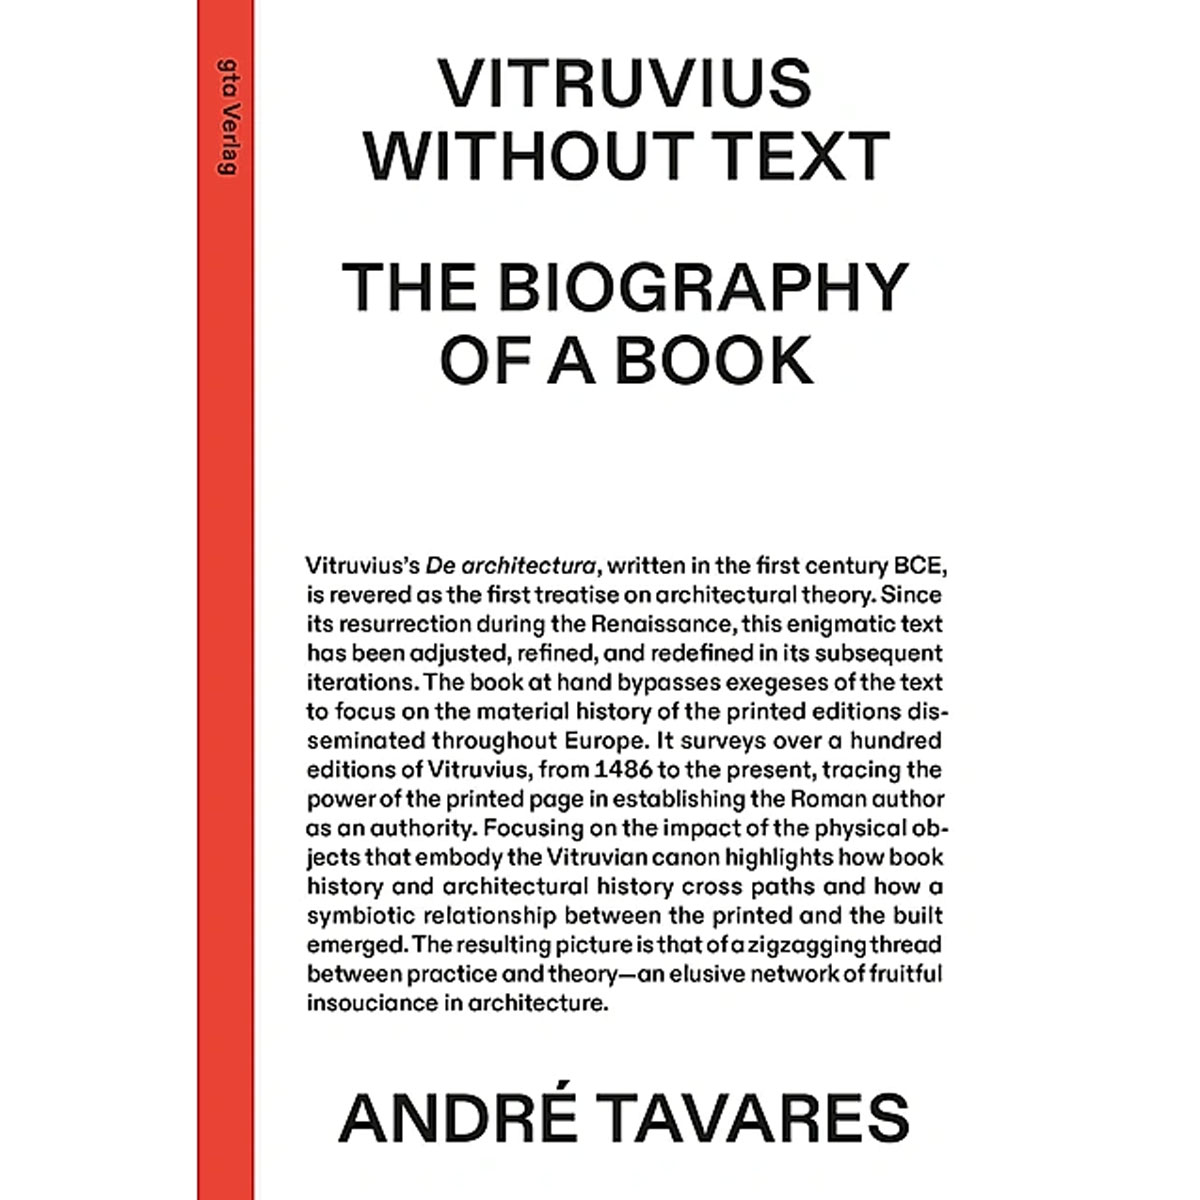 André Tavares: Vitruvius without text The Biography of a book